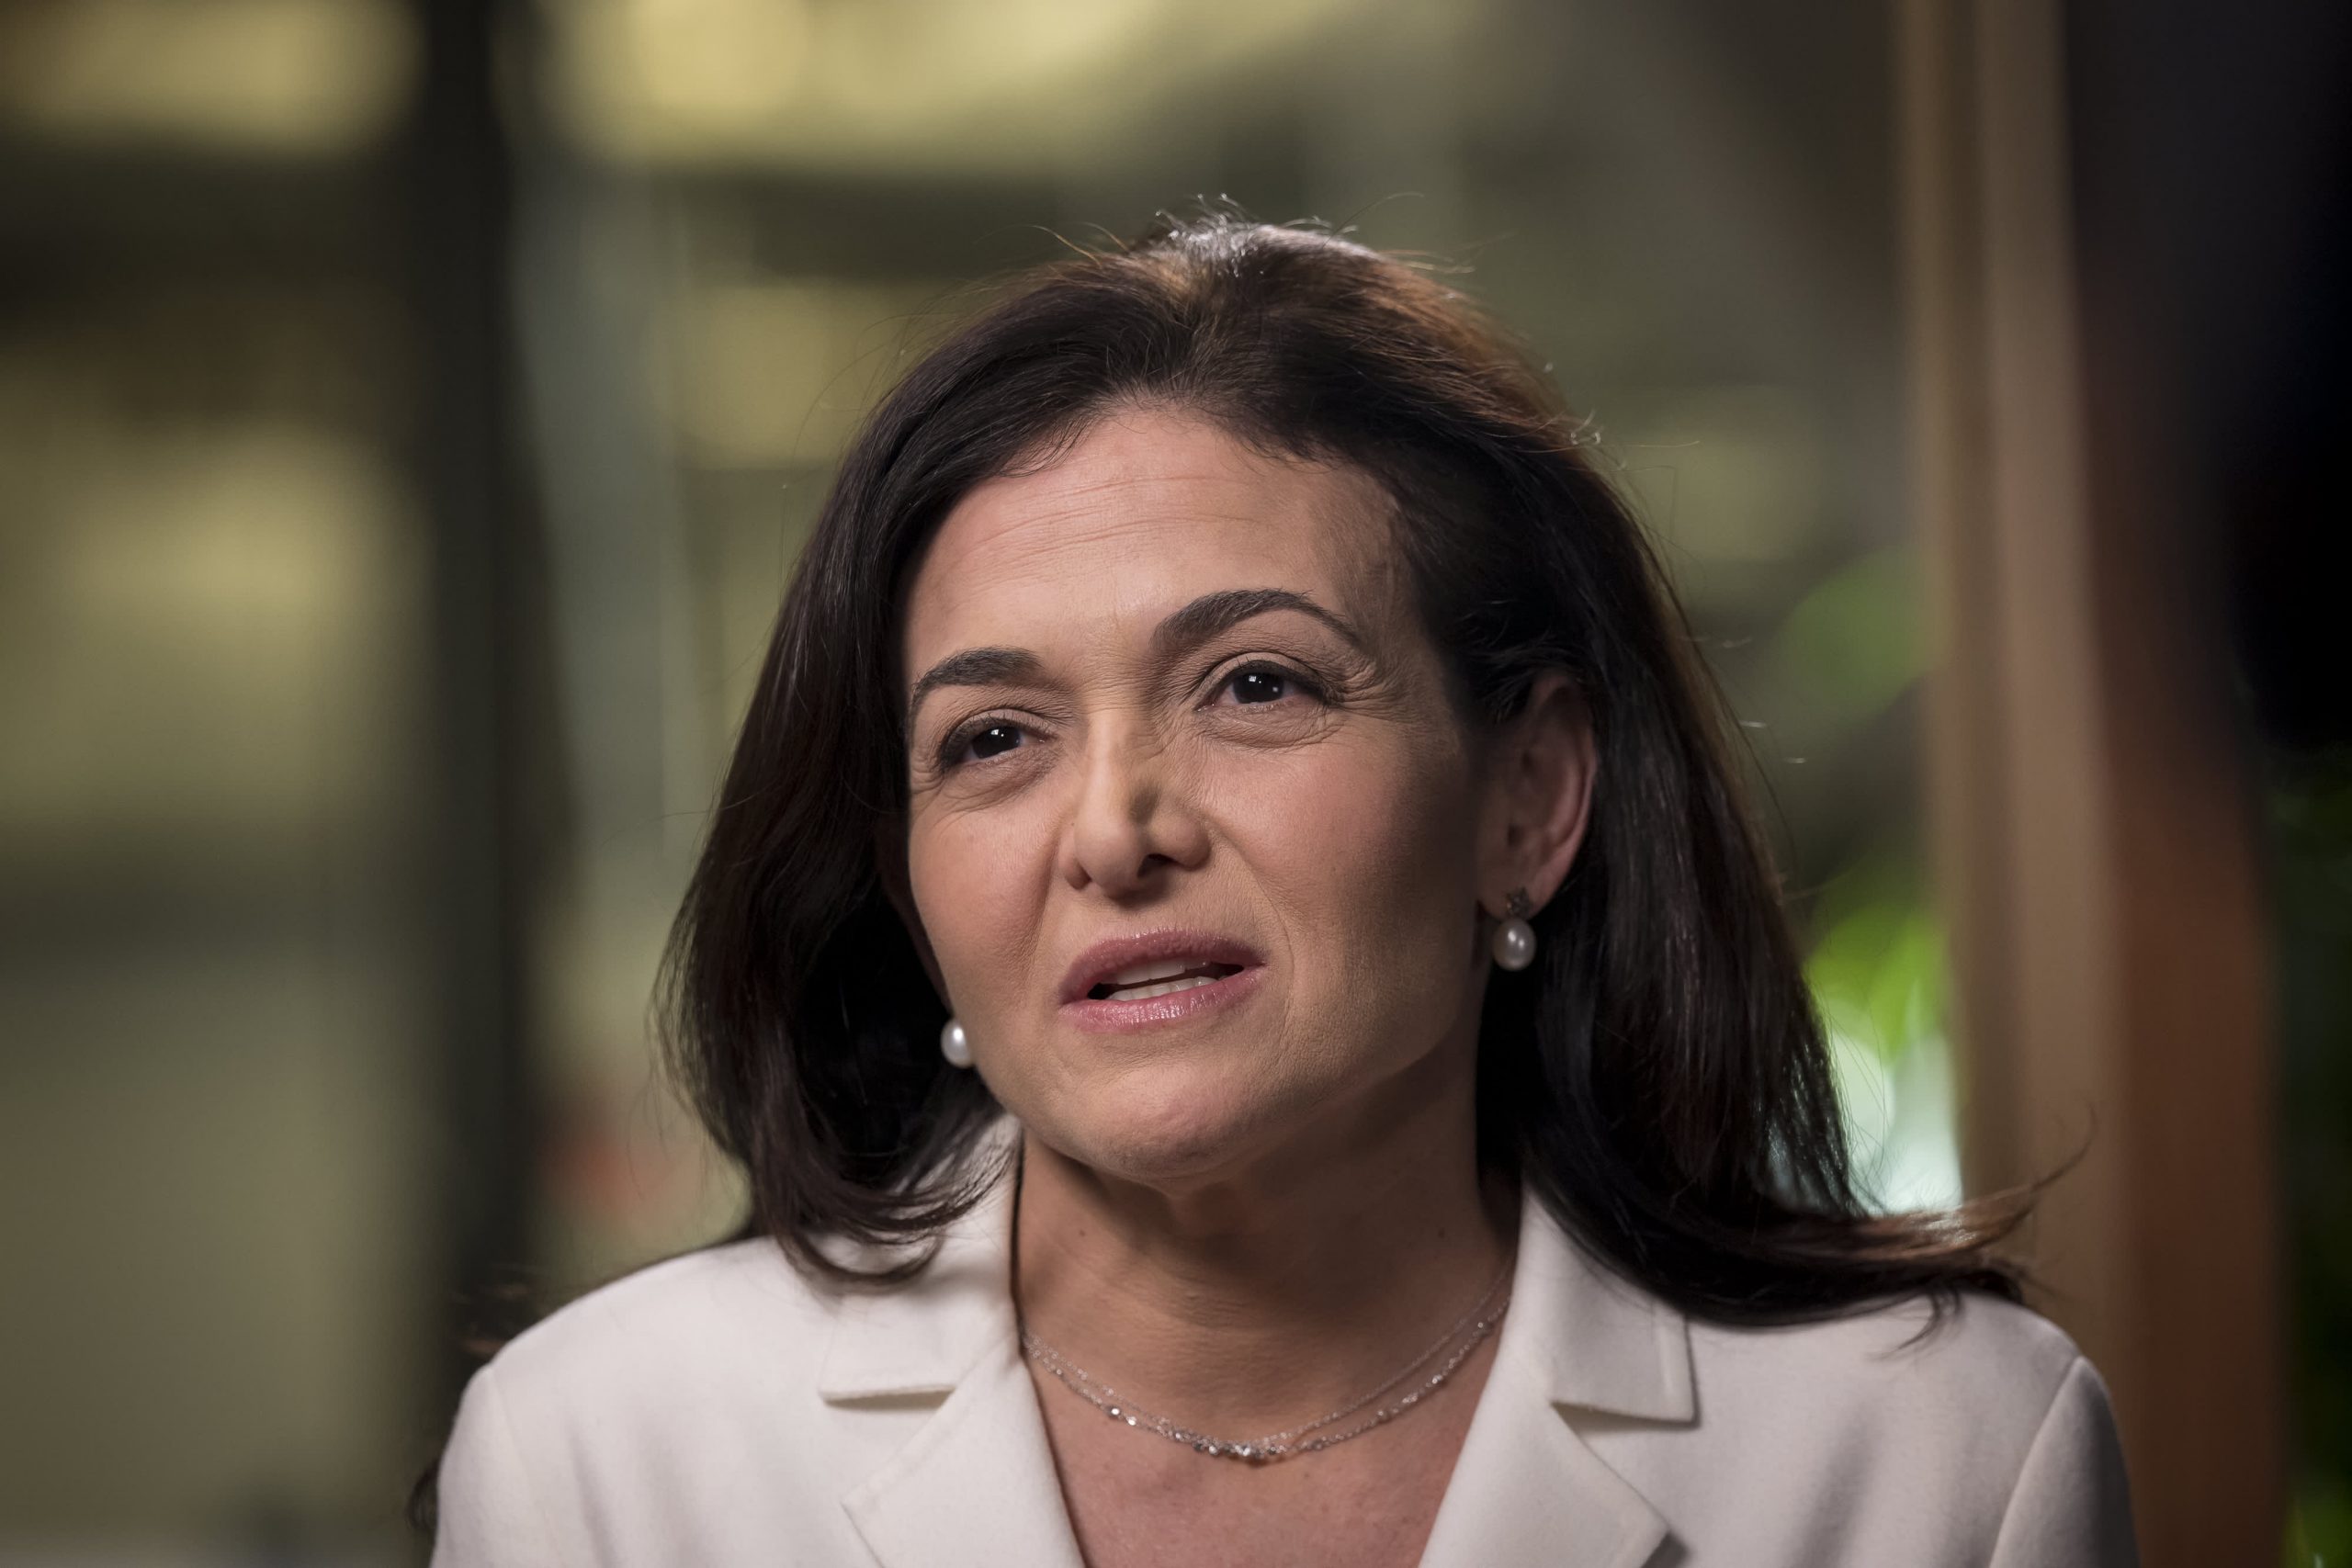 Facebook's Sandberg says government shouldn't approve mergers and revoke them later